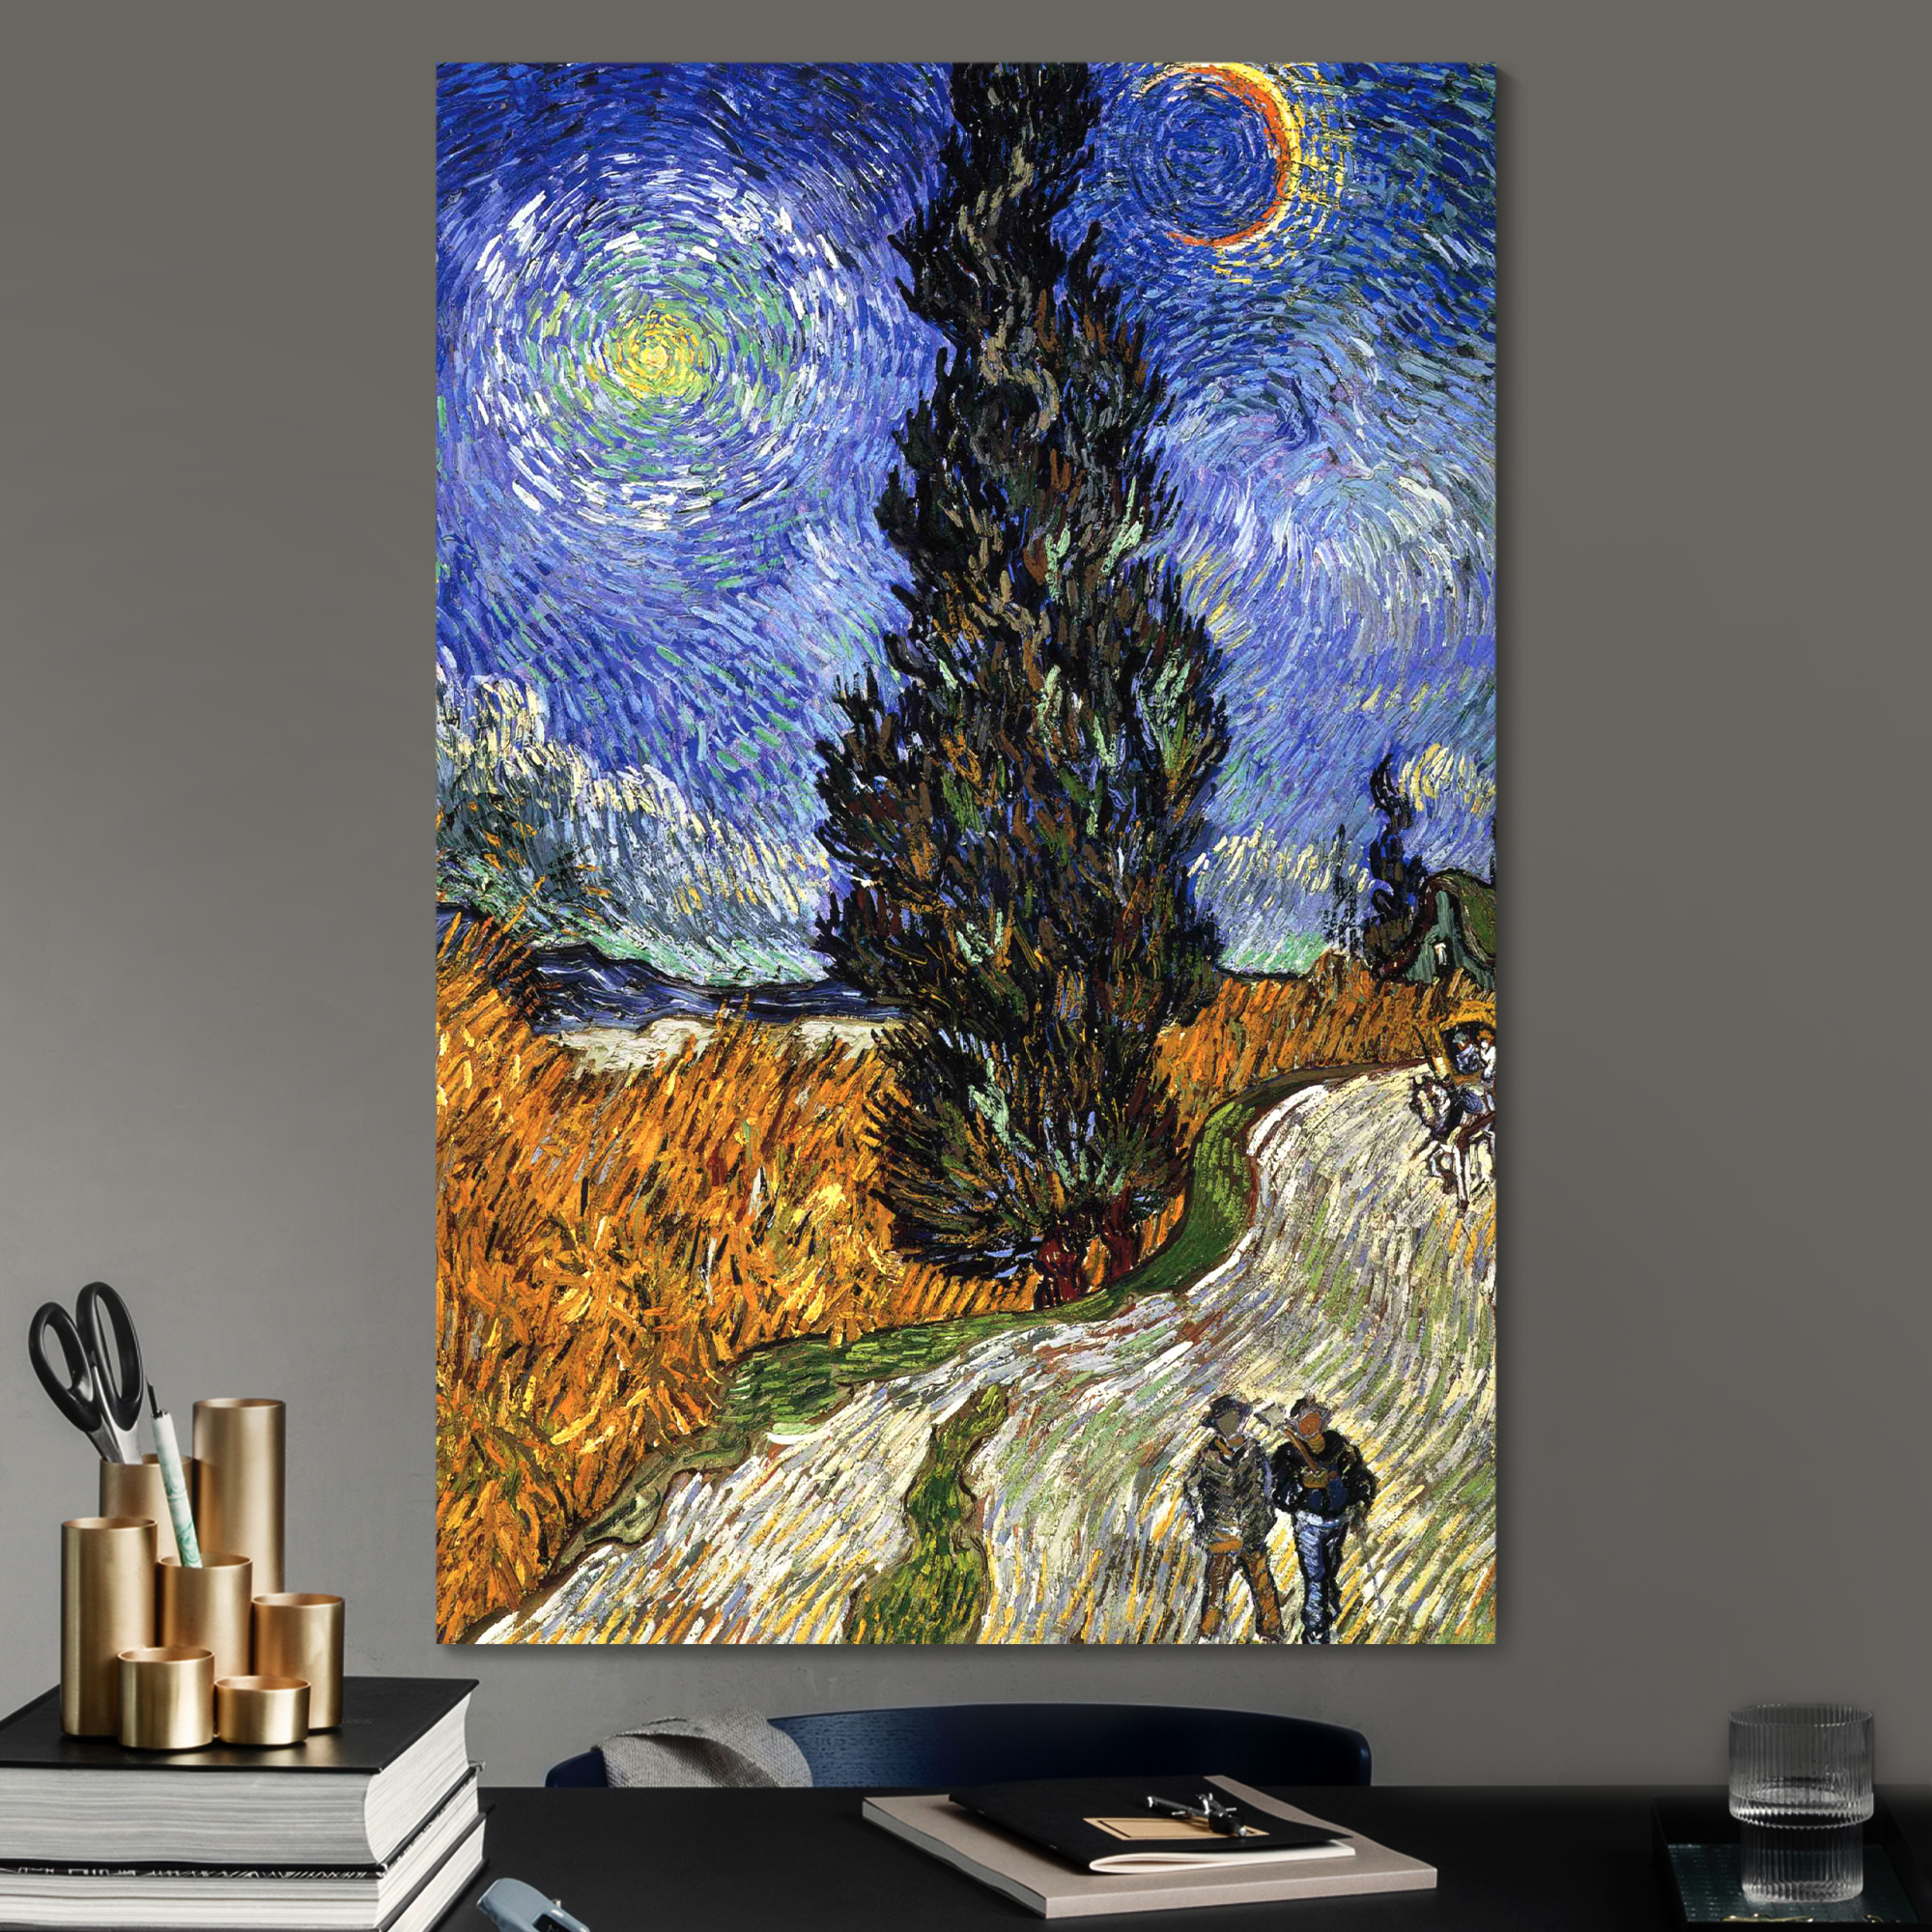 Road with Cypress and Star by Vincent Van Gogh Giclee Canvas Prints Wrapped Gallery Wall Art | Stretched and Framed Ready to Hang - 16